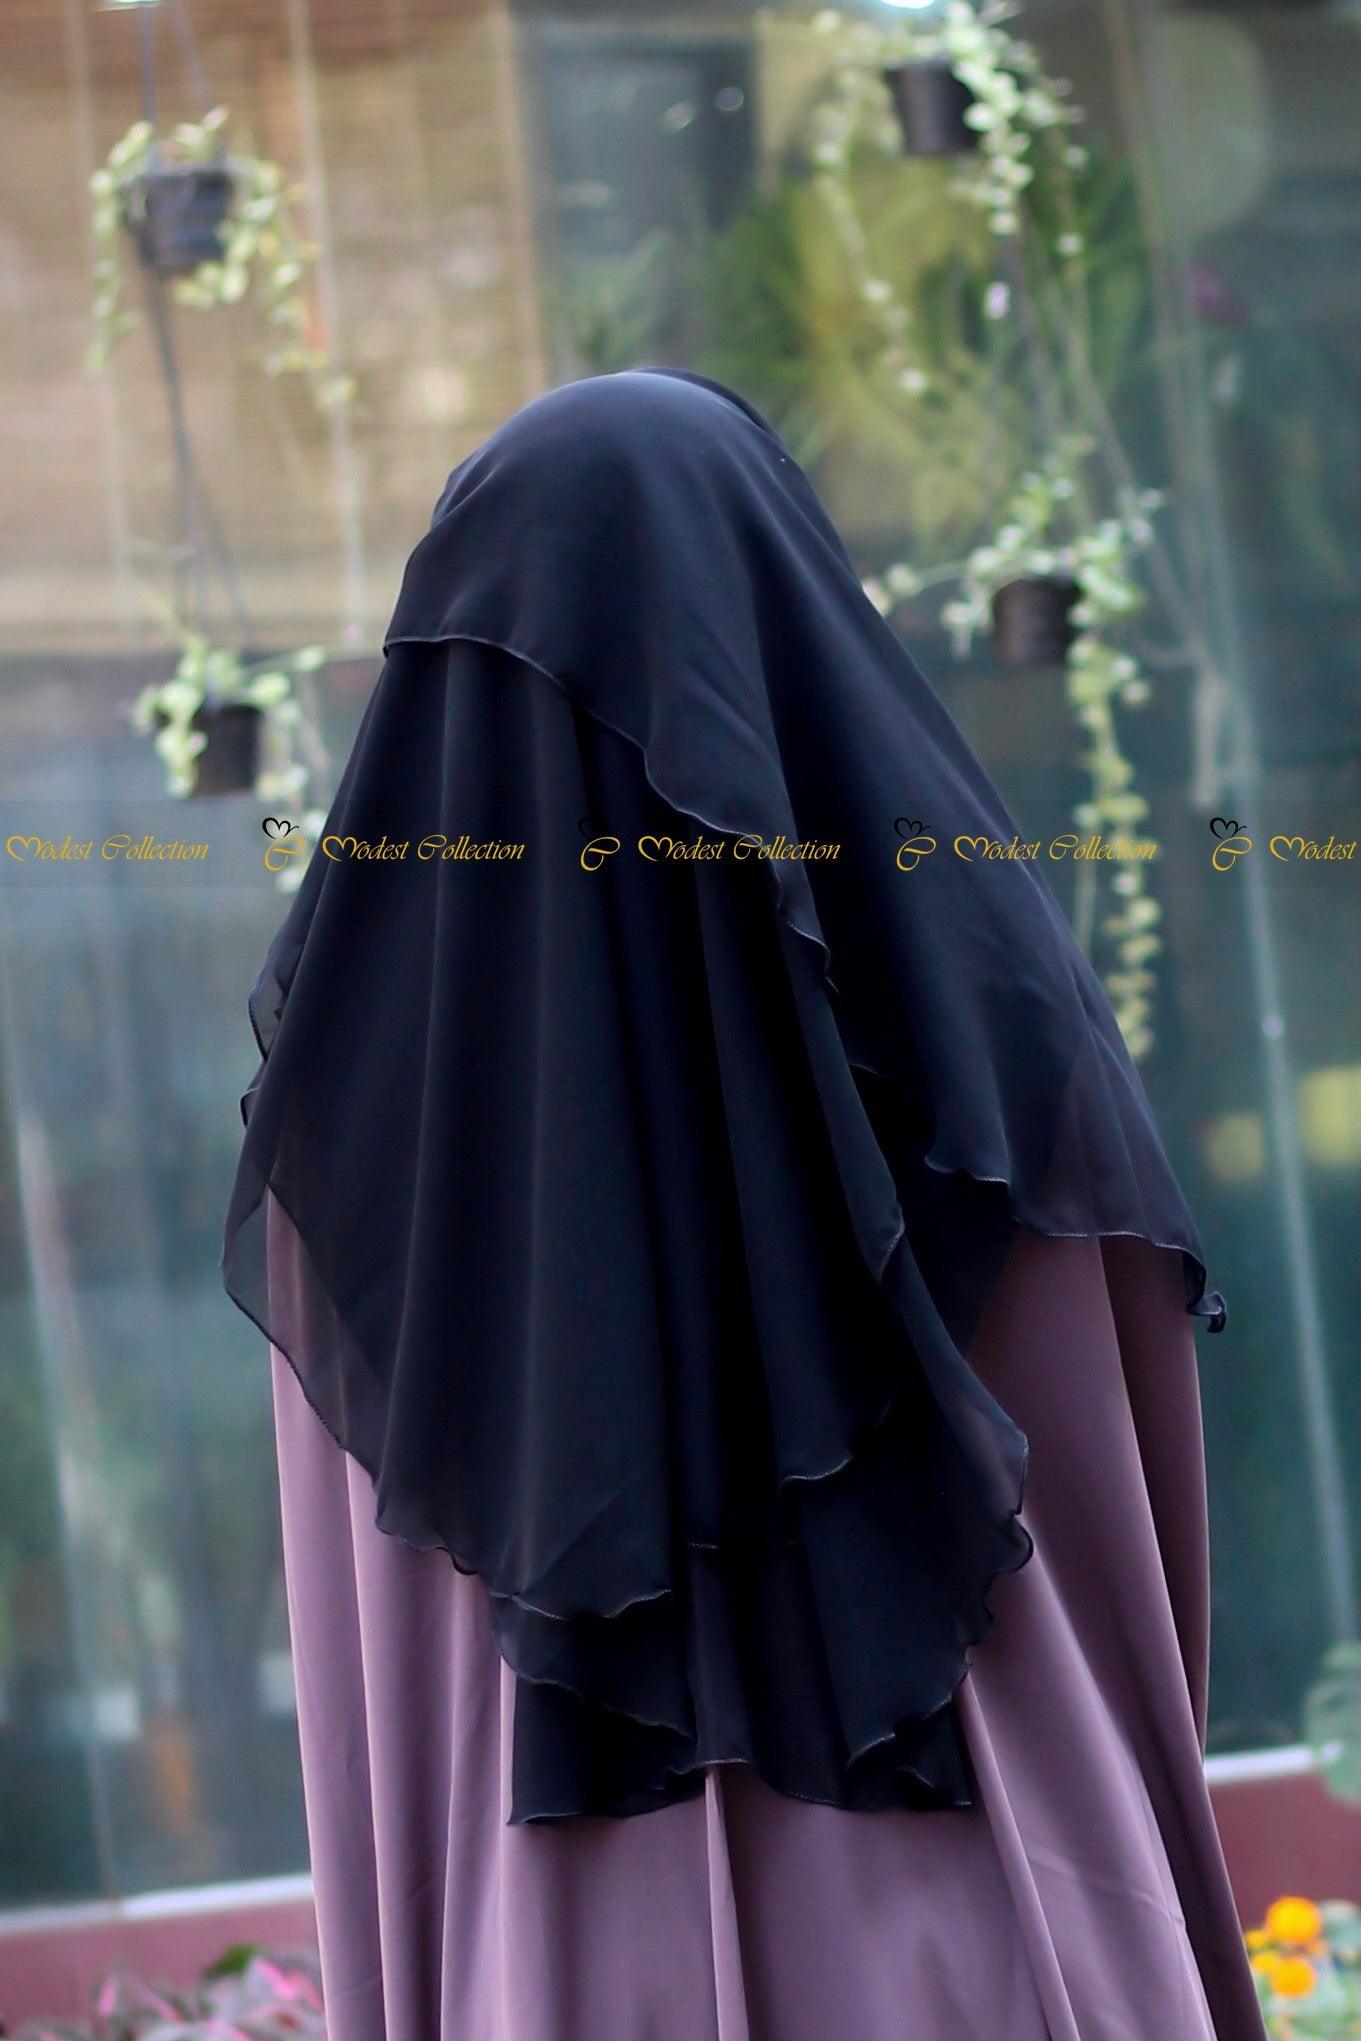 4 Layer Niqab Black - Modest Collection